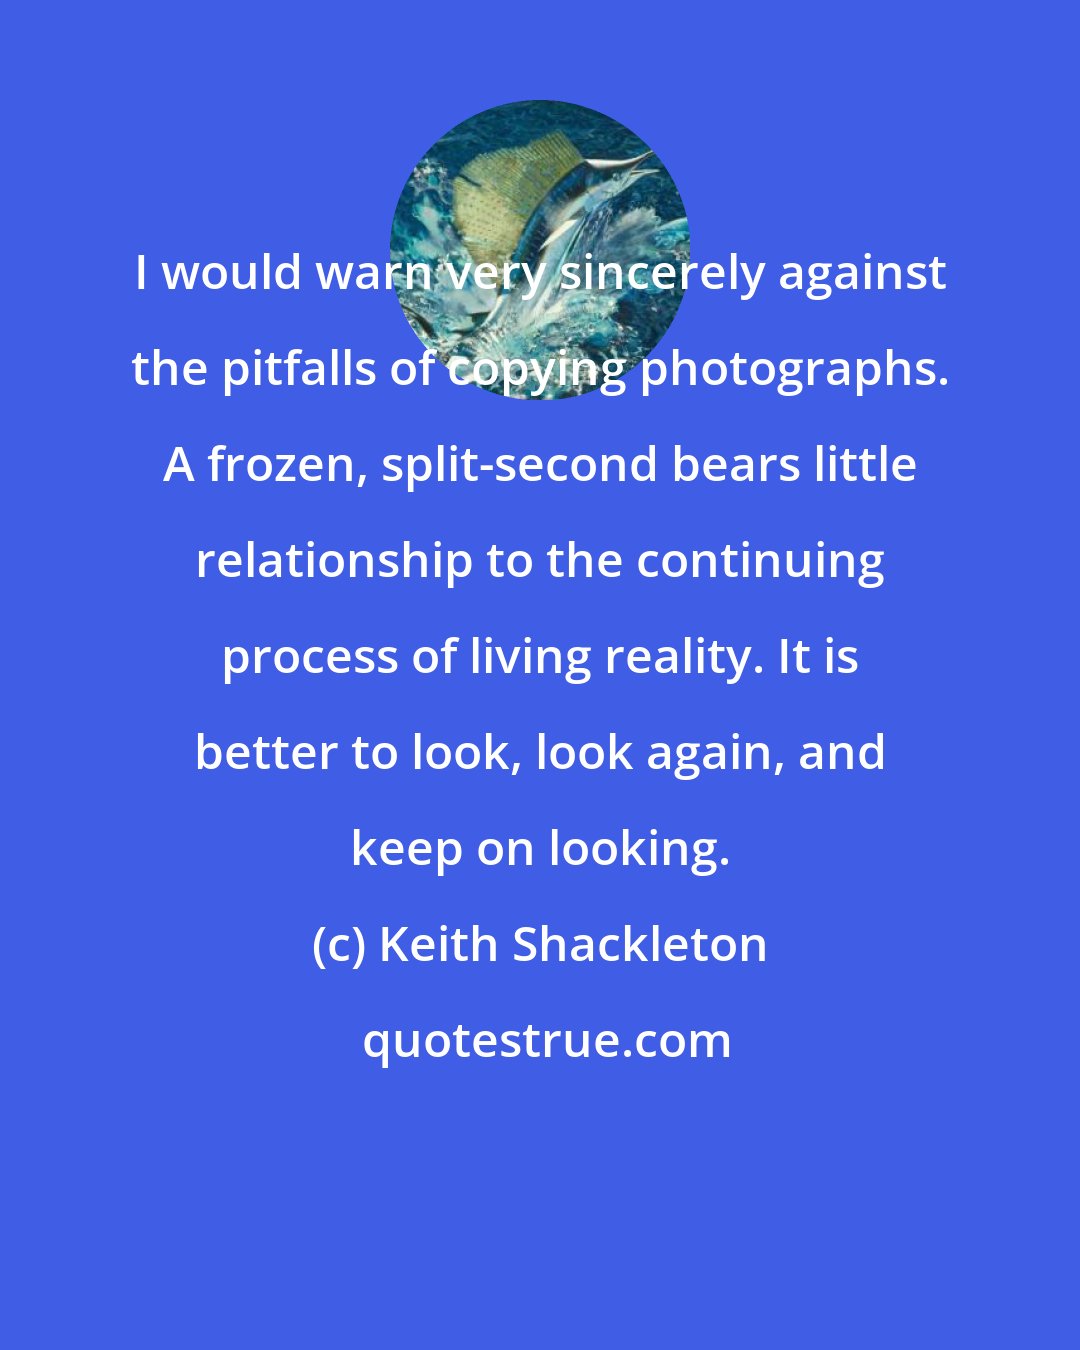 Keith Shackleton: I would warn very sincerely against the pitfalls of copying photographs. A frozen, split-second bears little relationship to the continuing process of living reality. It is better to look, look again, and keep on looking.